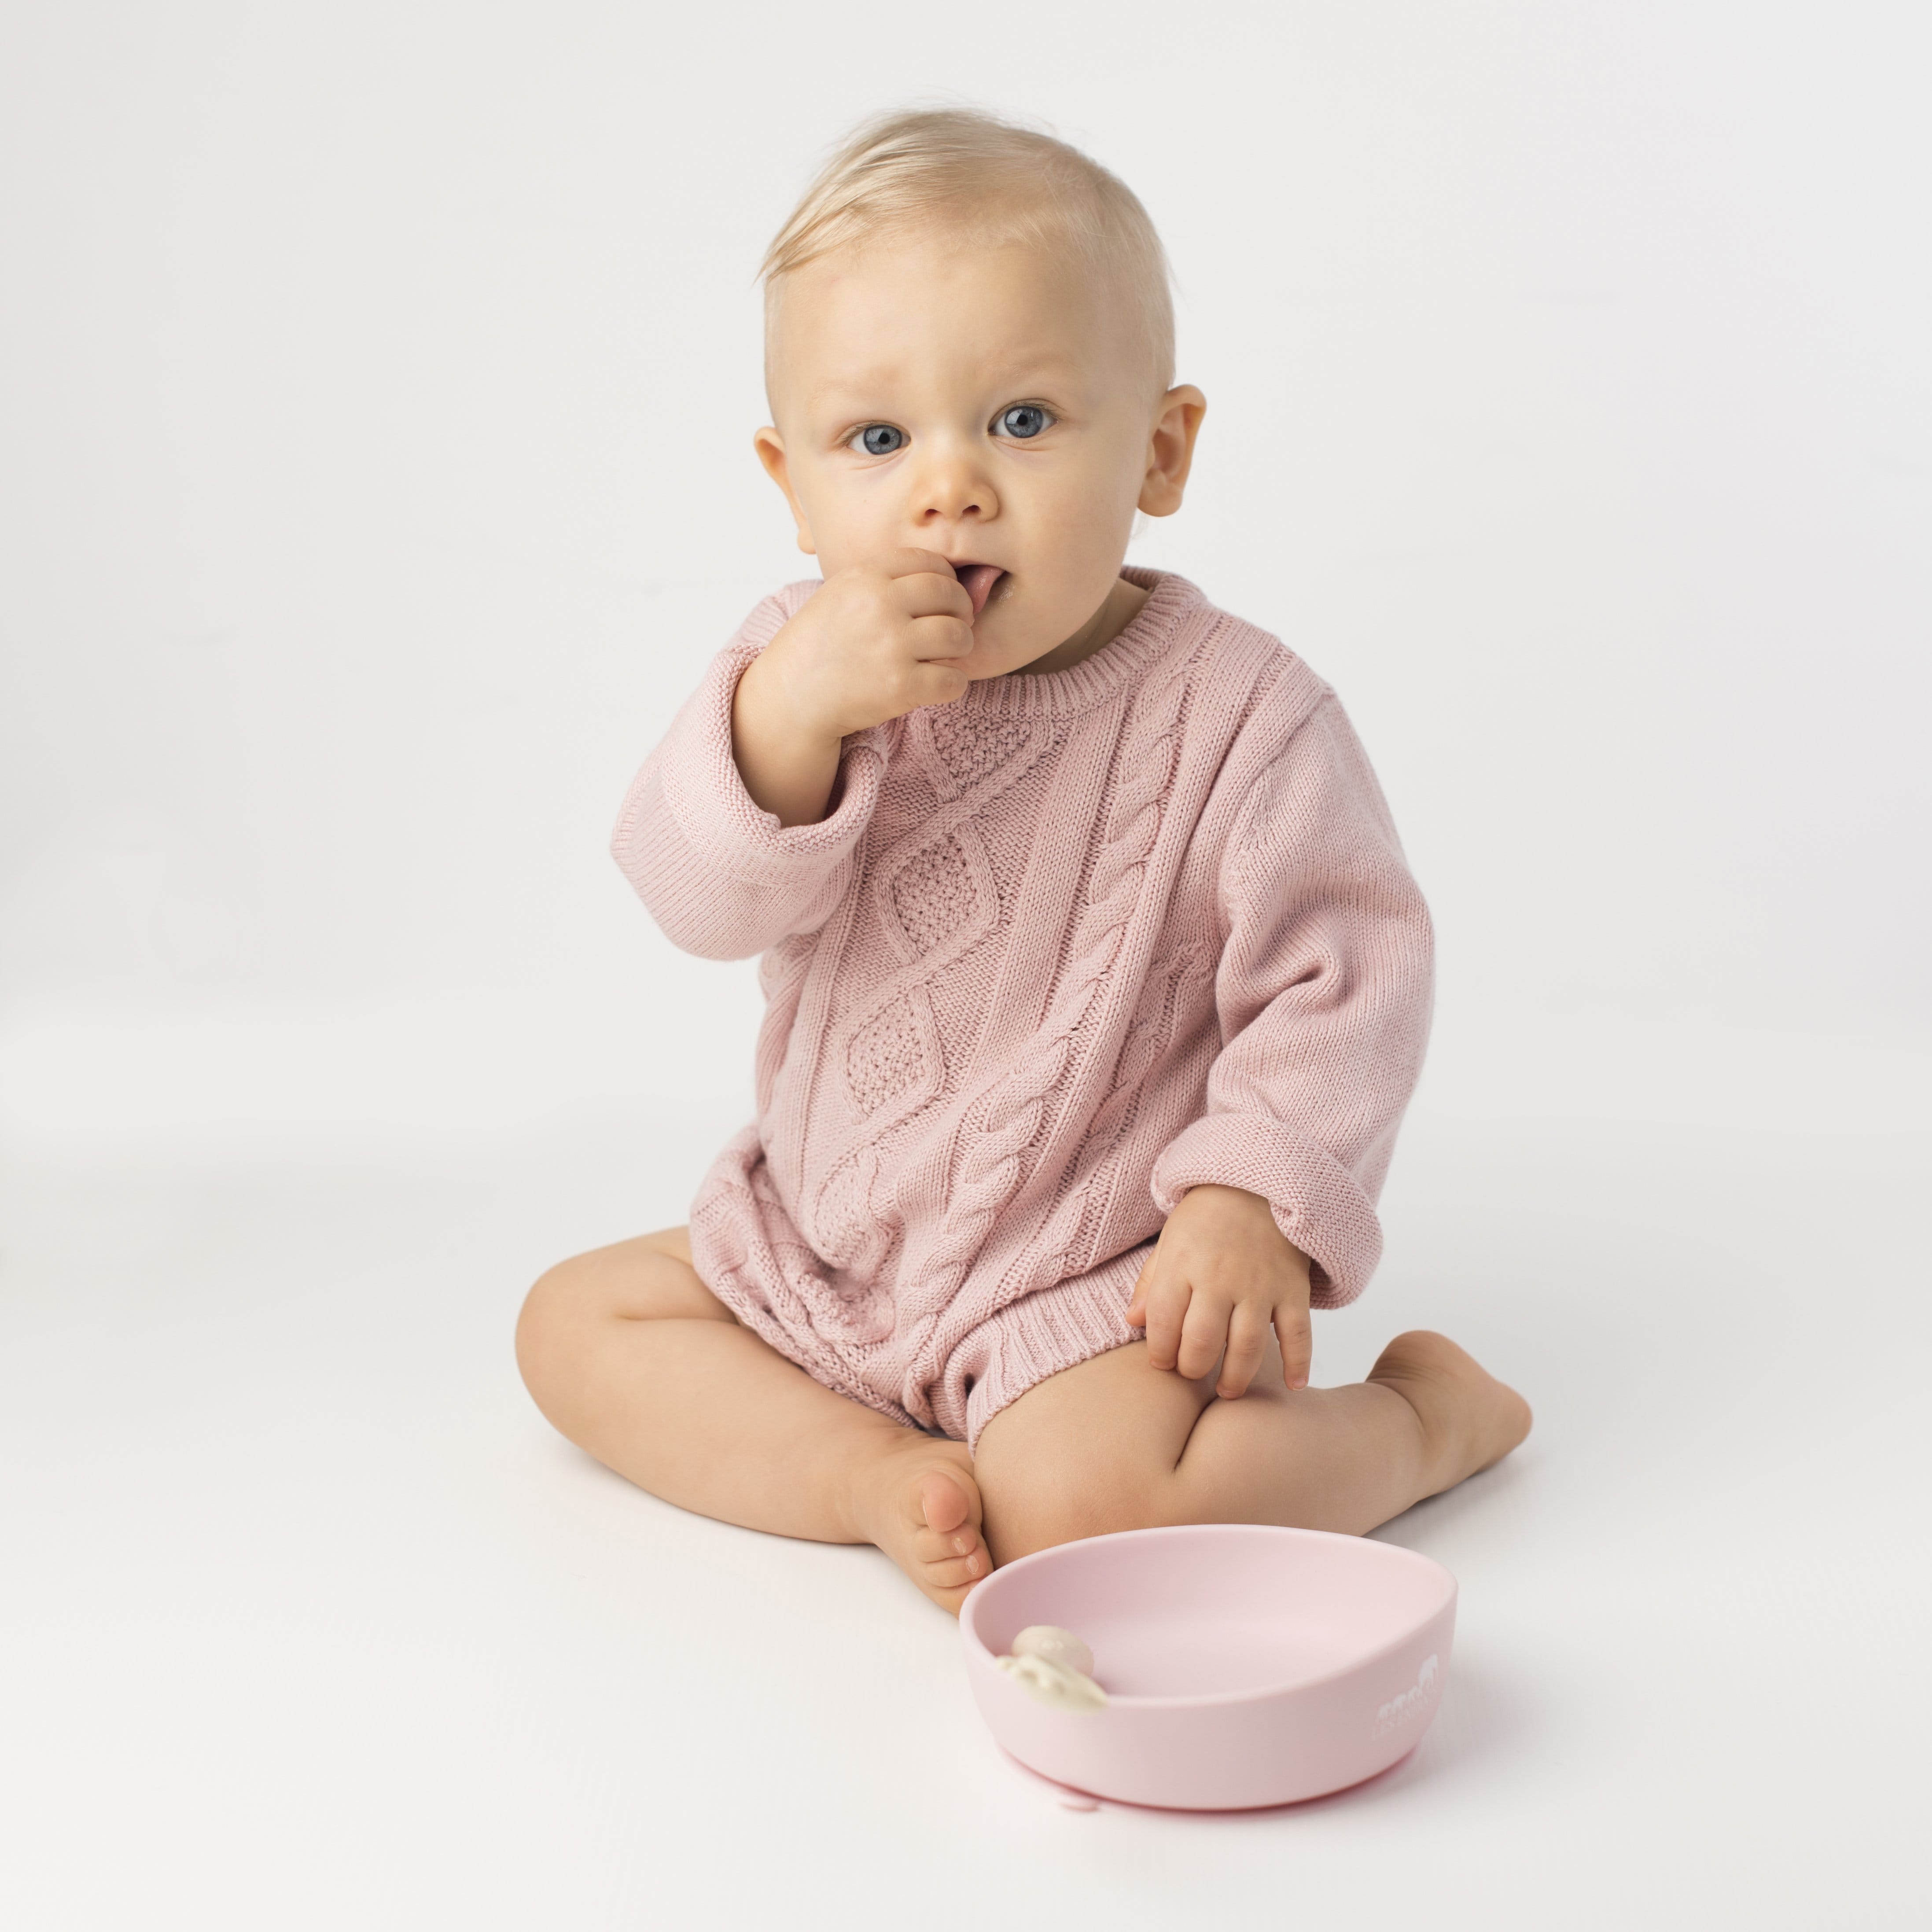 Les Enfants Silicon Baby Bowl and cutlery set pink and sand with baby